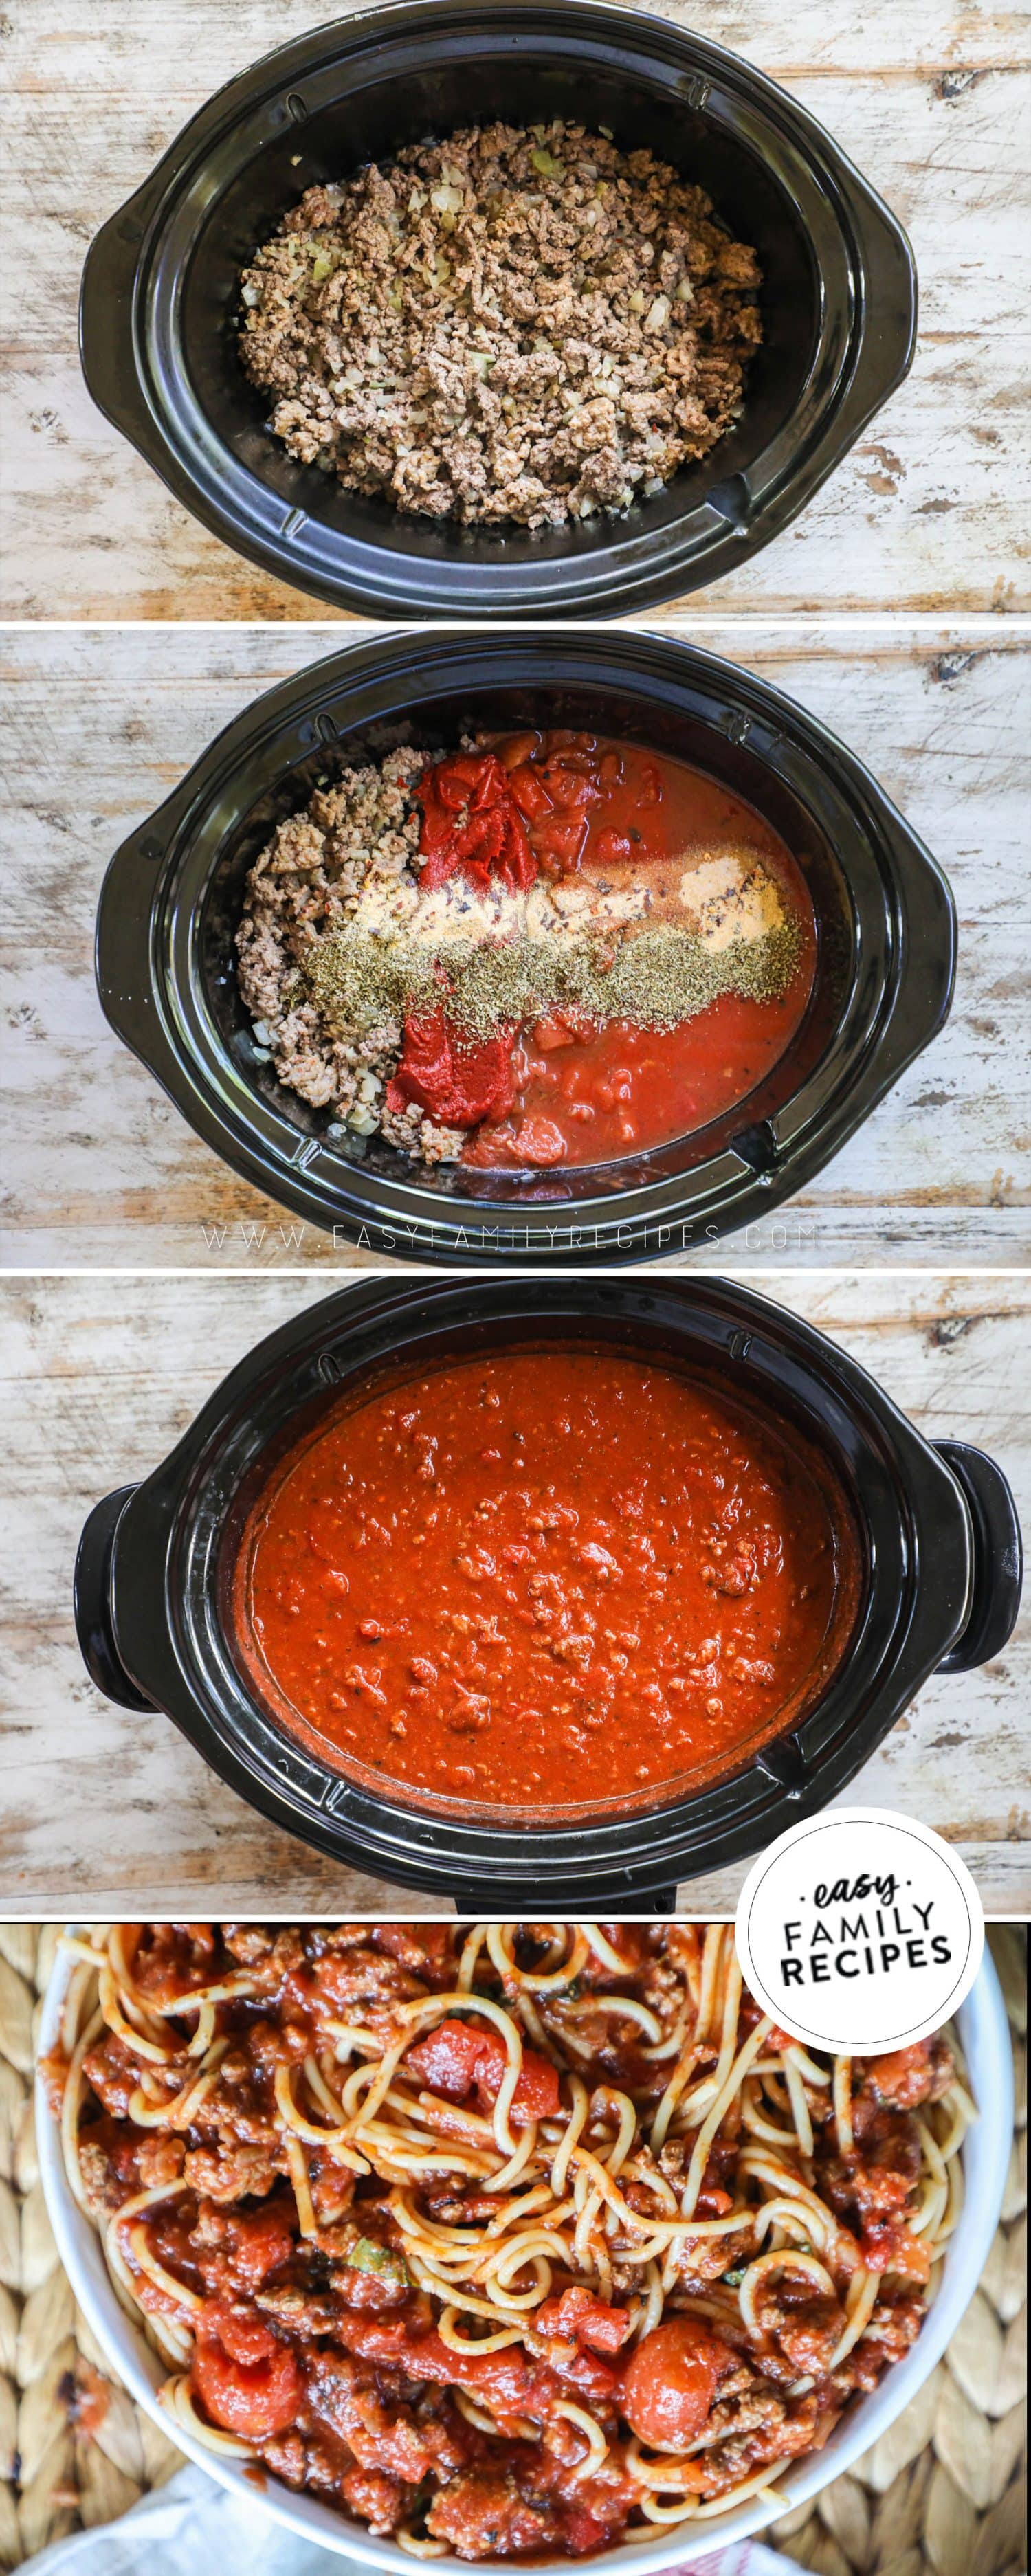 4 image vertical collage making sauce in crockpot: 1- cooked ground meat in slow cooker, 2- tomatoes, sauce, and seasonings added, 3- sauce after cooked, and 4- close up of sauce mixed with spaghetti noodles and a fork spinning some sauce and noodle onto it.